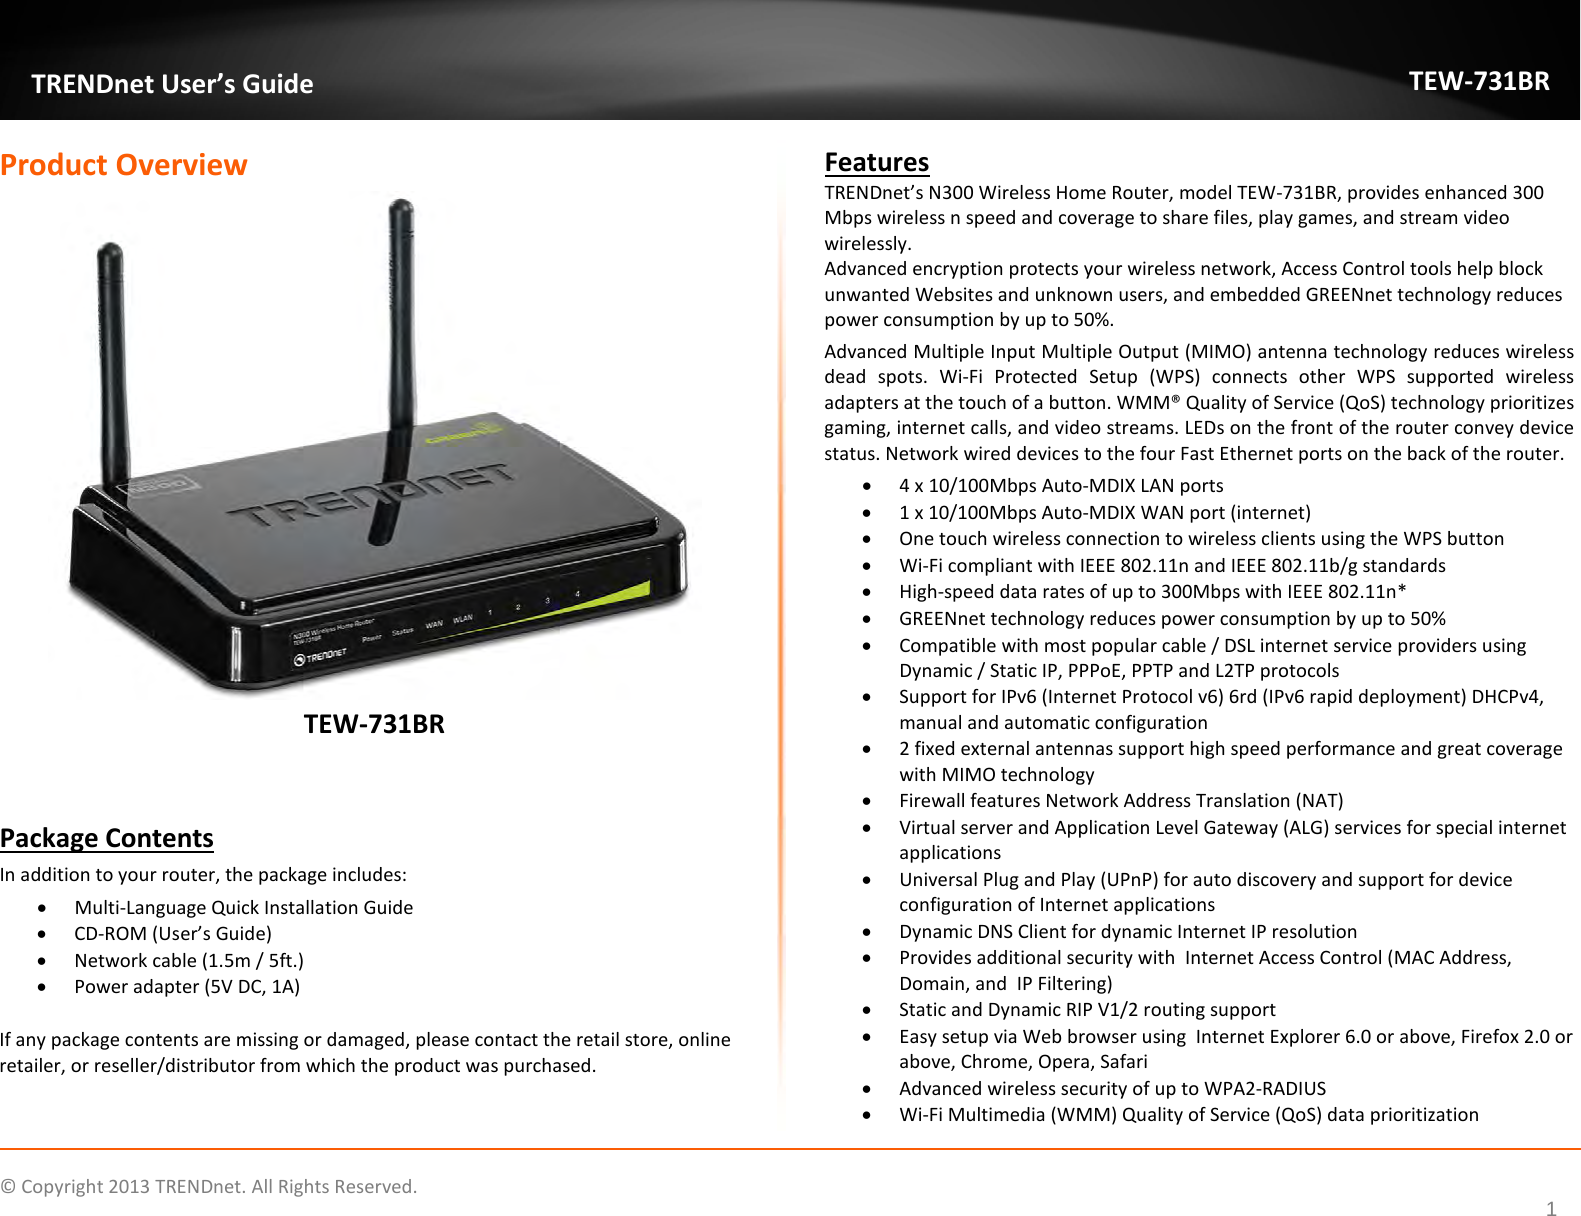             © Copyright 2013 TRENDnet. All Rights Reserved.       TRENDnet User’s Guide TEW-731BR 1 Product Overview  TEW-731BR   Package Contents In addition to your router, the package includes: • Multi-Language Quick Installation Guide • CD-ROM (User’s Guide) • Network cable (1.5m / 5ft.) • Power adapter (5V DC, 1A)  If any package contents are missing or damaged, please contact the retail store, online retailer, or reseller/distributor from which the product was purchased. Features TRENDnet’s N300 Wireless Home Router, model TEW-731BR, provides enhanced 300 Mbps wireless n speed and coverage to share files, play games, and stream video wirelessly.  Advanced encryption protects your wireless network, Access Control tools help block unwanted Websites and unknown users, and embedded GREENnet technology reduces power consumption by up to 50%.  Advanced Multiple Input Multiple Output (MIMO) antenna technology reduces wireless dead spots. Wi-Fi Protected Setup (WPS) connects other WPS supported wireless adapters at the touch of a button. WMM® Quality of Service (QoS) technology prioritizes gaming, internet calls, and video streams. LEDs on the front of the router convey device status. Network wired devices to the four Fast Ethernet ports on the back of the router. • 4 x 10/100Mbps Auto-MDIX LAN ports   • 1 x 10/100Mbps Auto-MDIX WAN port (internet) • One touch wireless connection to wireless clients using the WPS button • Wi-Fi compliant with IEEE 802.11n and IEEE 802.11b/g standards • High-speed data rates of up to 300Mbps with IEEE 802.11n* • GREENnet technology reduces power consumption by up to 50% • Compatible with most popular cable / DSL internet service providers using Dynamic / Static IP, PPPoE, PPTP and L2TP protocols  • Support for IPv6 (Internet Protocol v6) 6rd (IPv6 rapid deployment) DHCPv4, manual and automatic configuration • 2 fixed external antennas support high speed performance and great coverage with MIMO technology • Firewall features Network Address Translation (NAT) • Virtual server and Application Level Gateway (ALG) services for special internet applications  • Universal Plug and Play (UPnP) for auto discovery and support for device configuration of Internet applications • Dynamic DNS Client for dynamic Internet IP resolution • Provides additional security with  Internet Access Control (MAC Address, Domain, and  IP Filtering) • Static and Dynamic RIP V1/2 routing support • Easy setup via Web browser using  Internet Explorer 6.0 or above, Firefox 2.0 or above, Chrome, Opera, Safari • Advanced wireless security of up to WPA2-RADIUS • Wi-Fi Multimedia (WMM) Quality of Service (QoS) data prioritization 